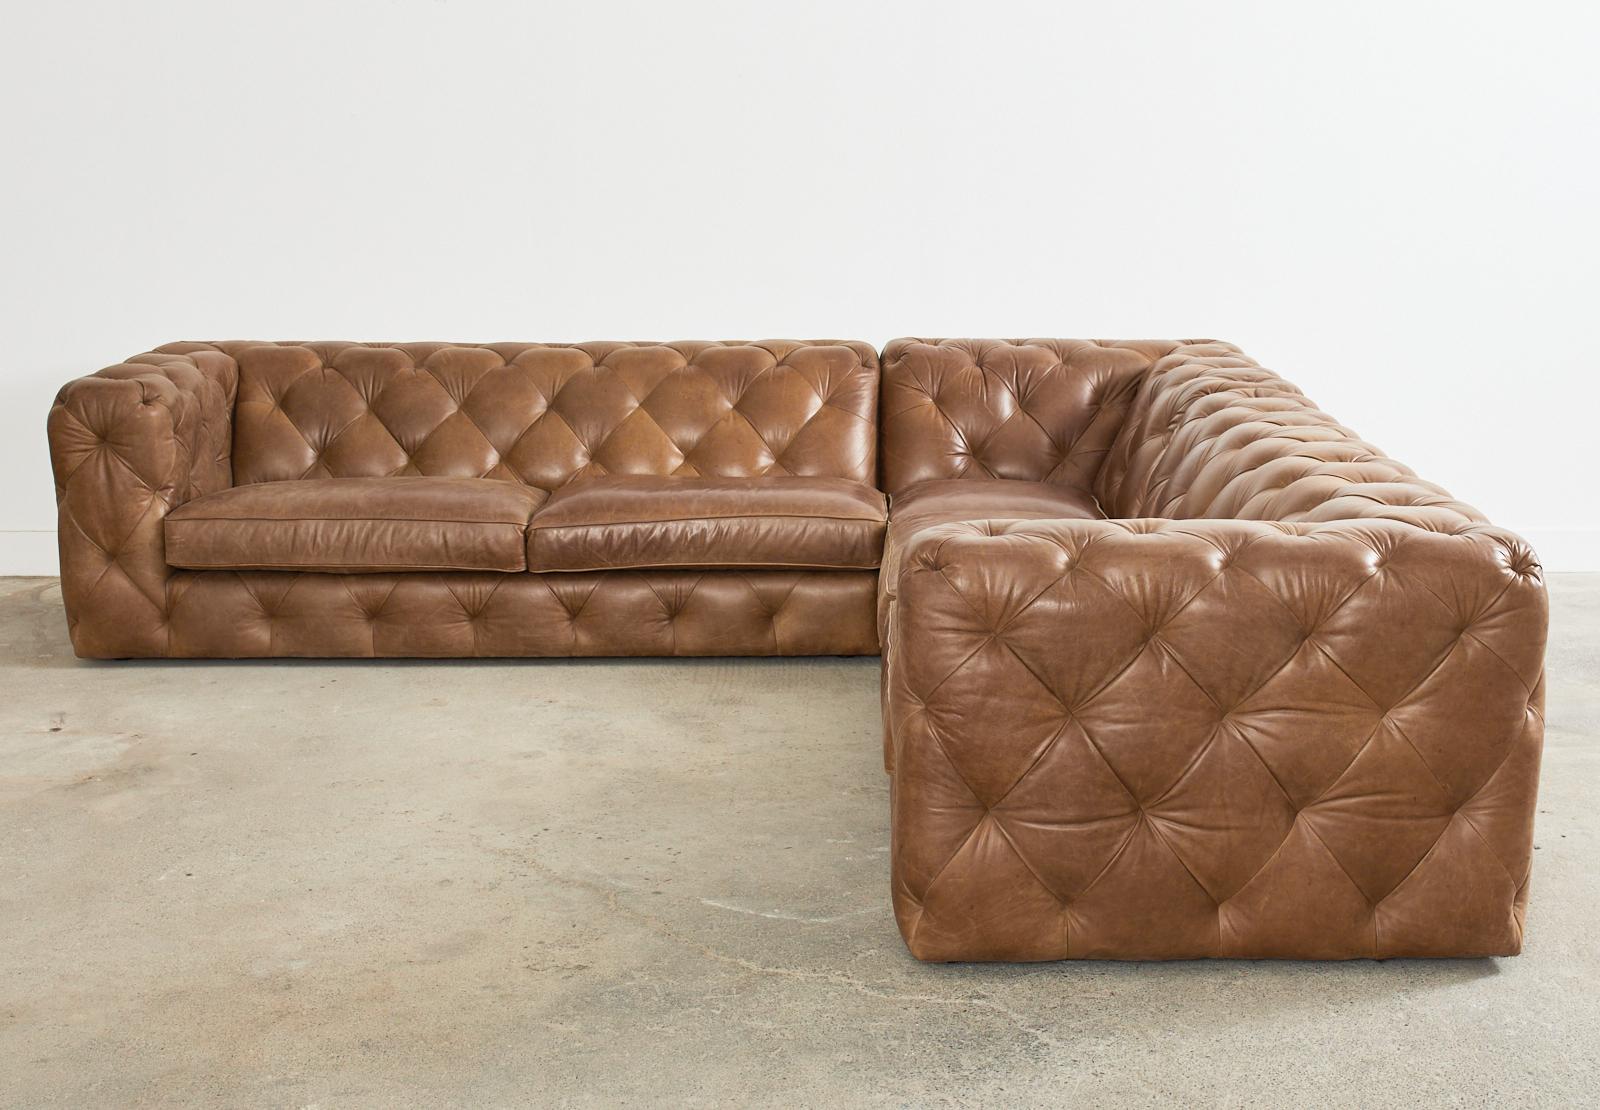 Grand English chesterfield style sectional sofa hand-crafted by Bernhardt for Neiman-Marcus. This rare artisan made sofa features a hardwood frame with mortise and tenon construction covered with beautifully aged and intentionally distressed tufted